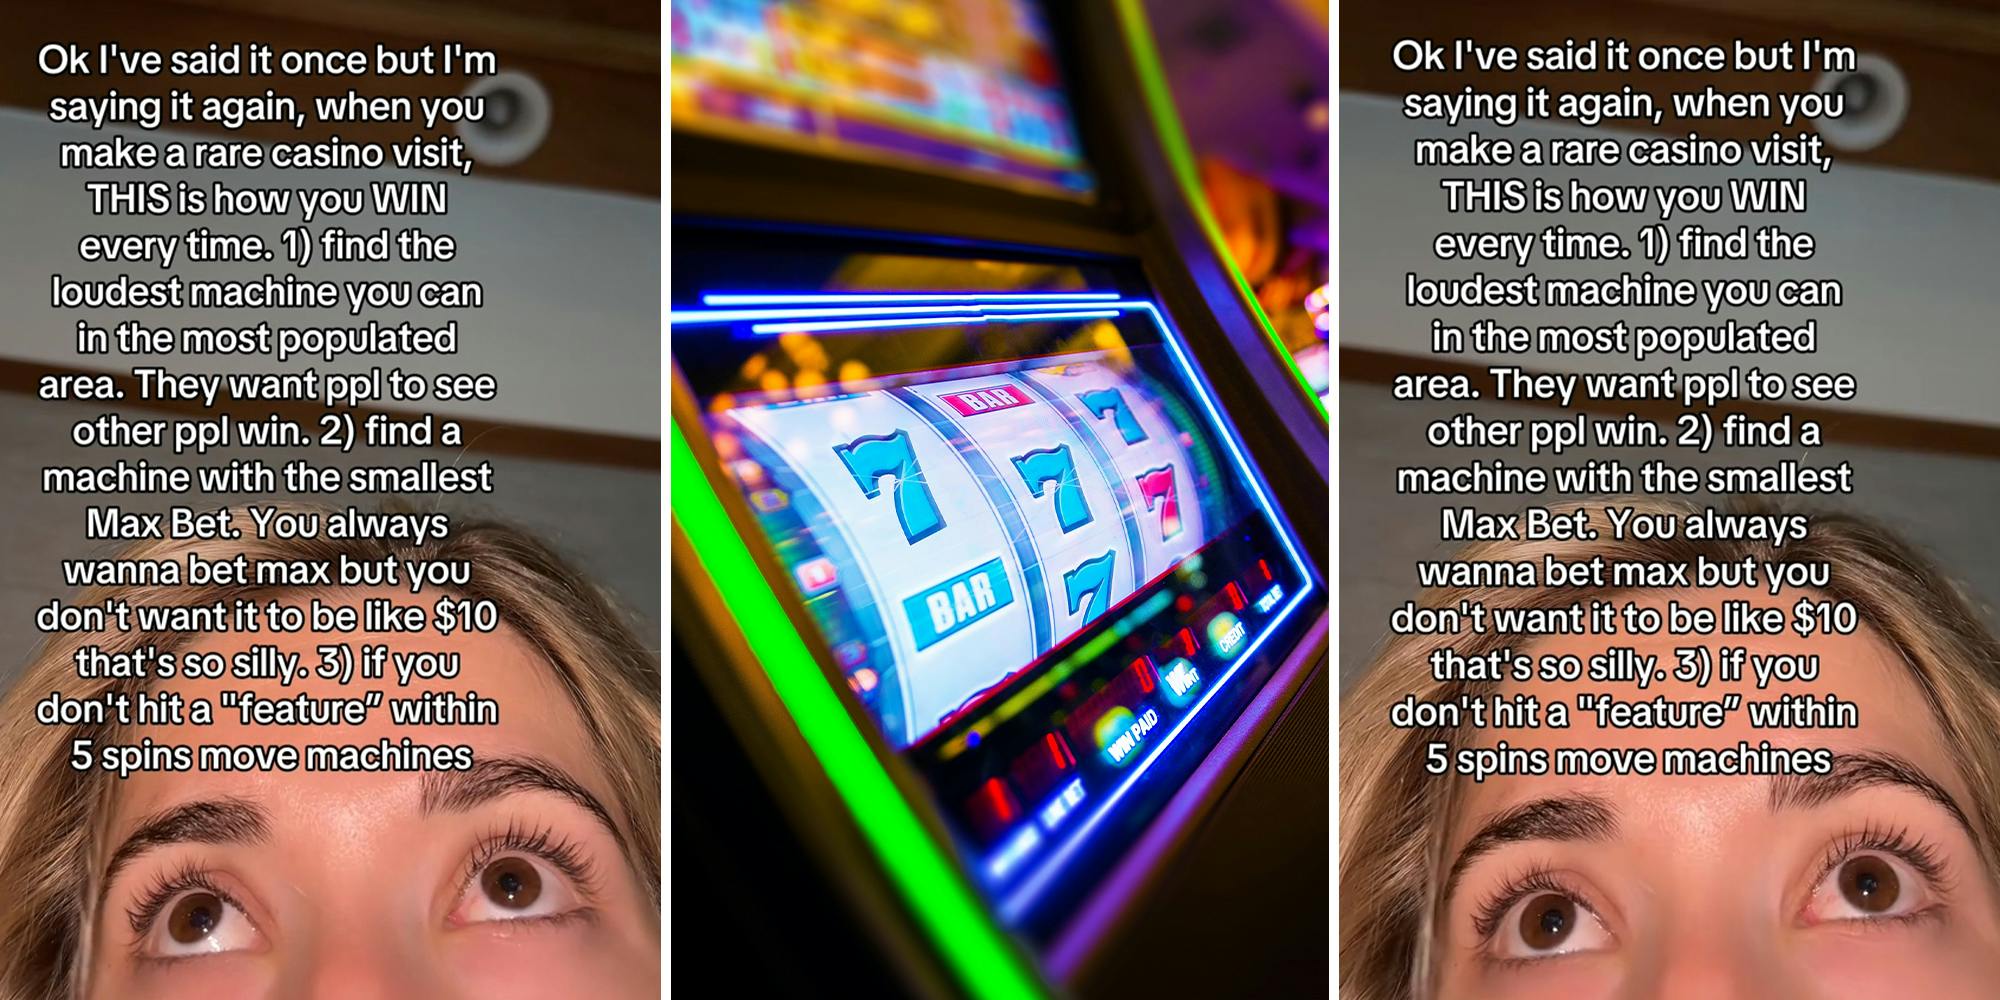 Woman shares how to win ‘every time’ you visit a casino